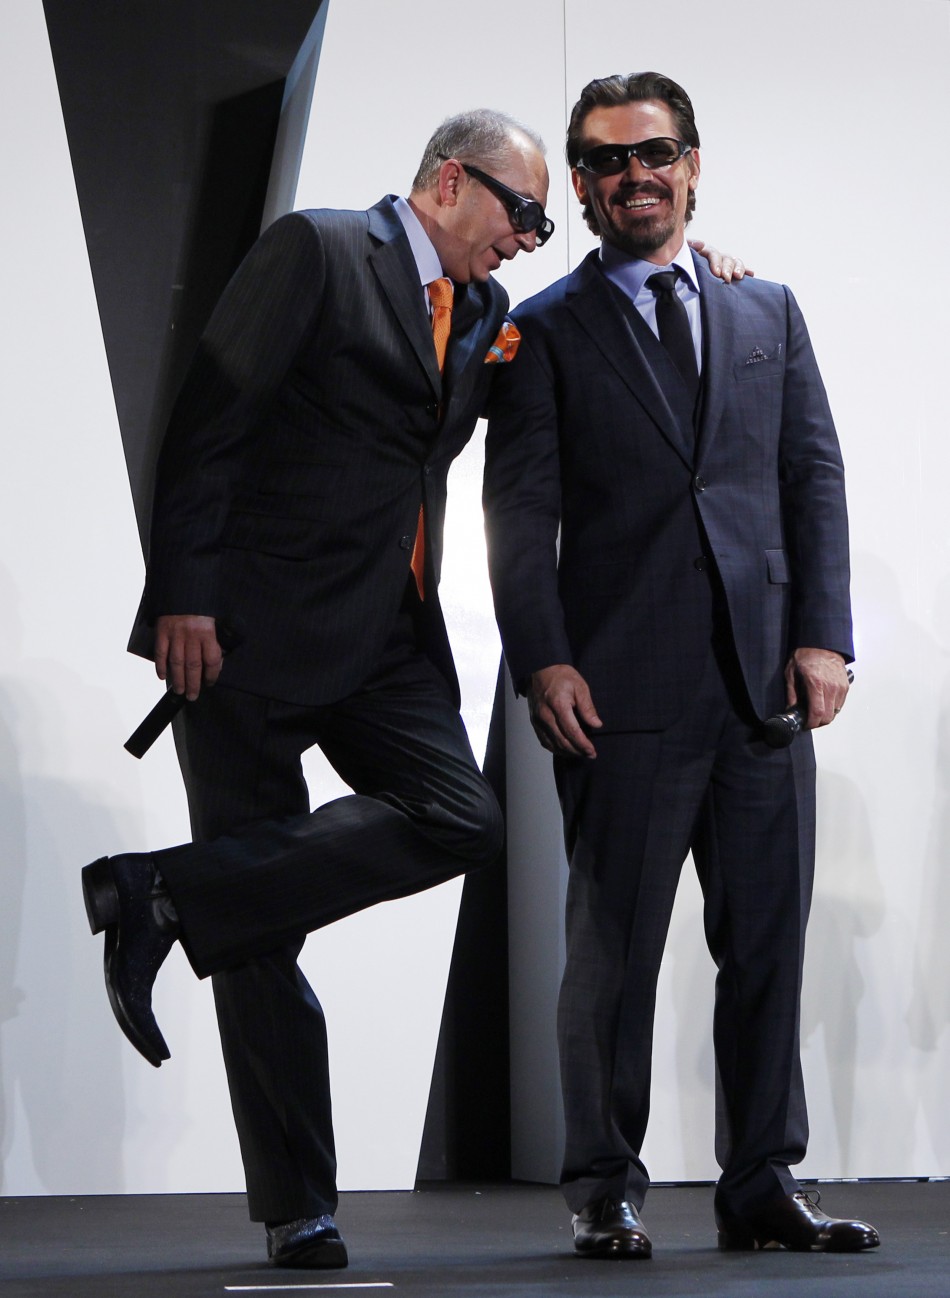 Director Barry Sonnenfeld leans on his cast member Josh Brolin to stretch his leg on a stage at a red carpet event in Japan